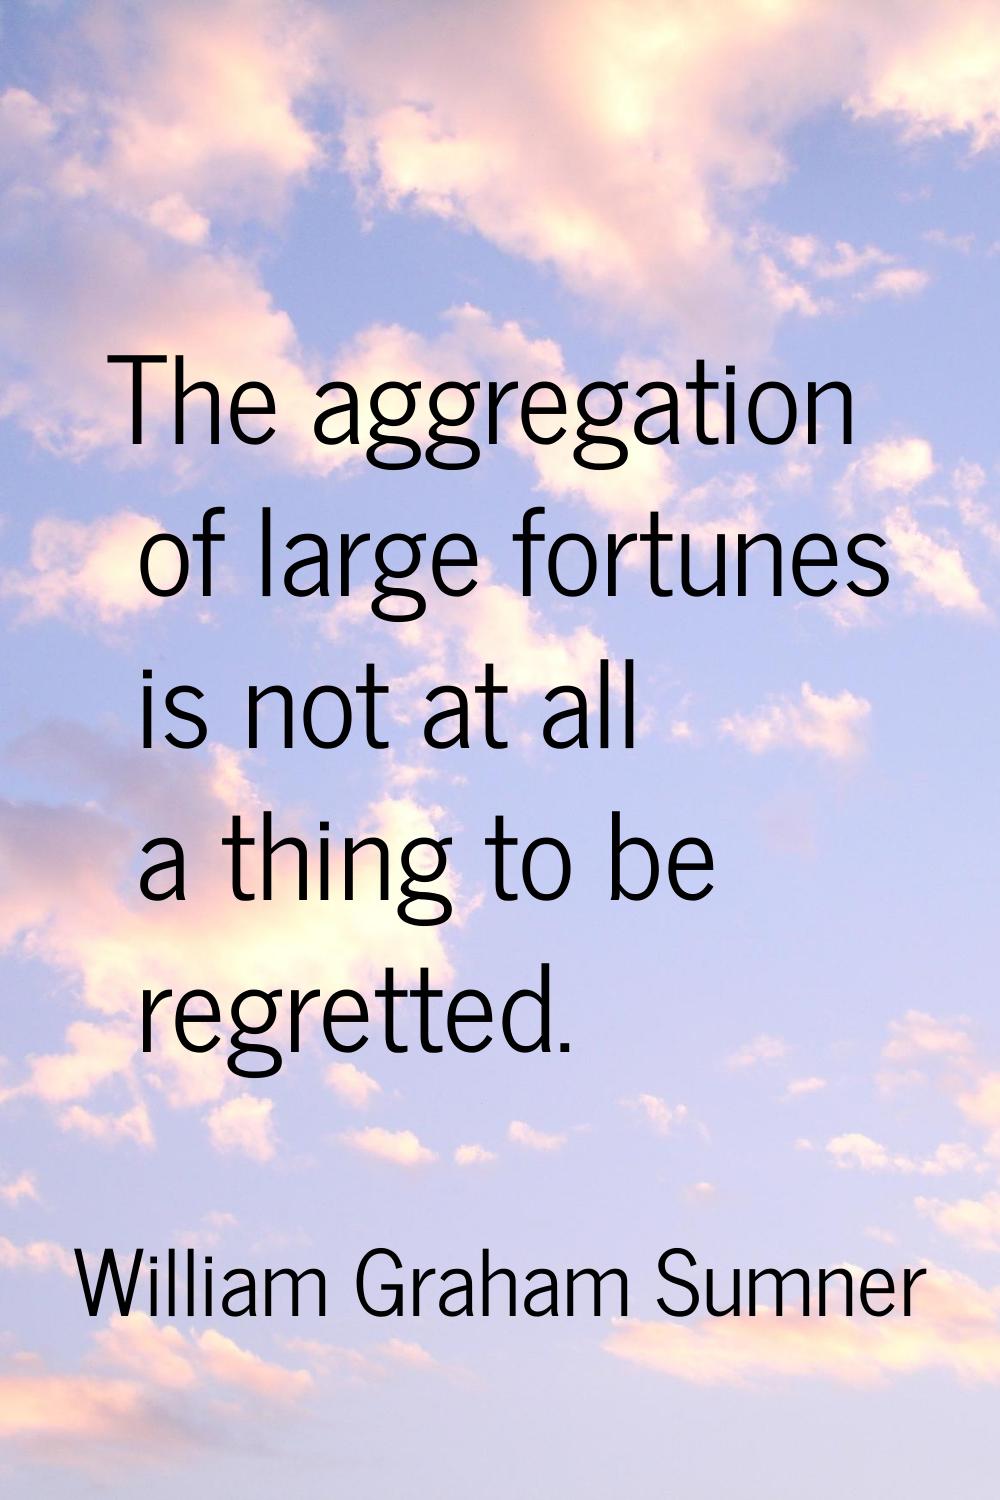 The aggregation of large fortunes is not at all a thing to be regretted.